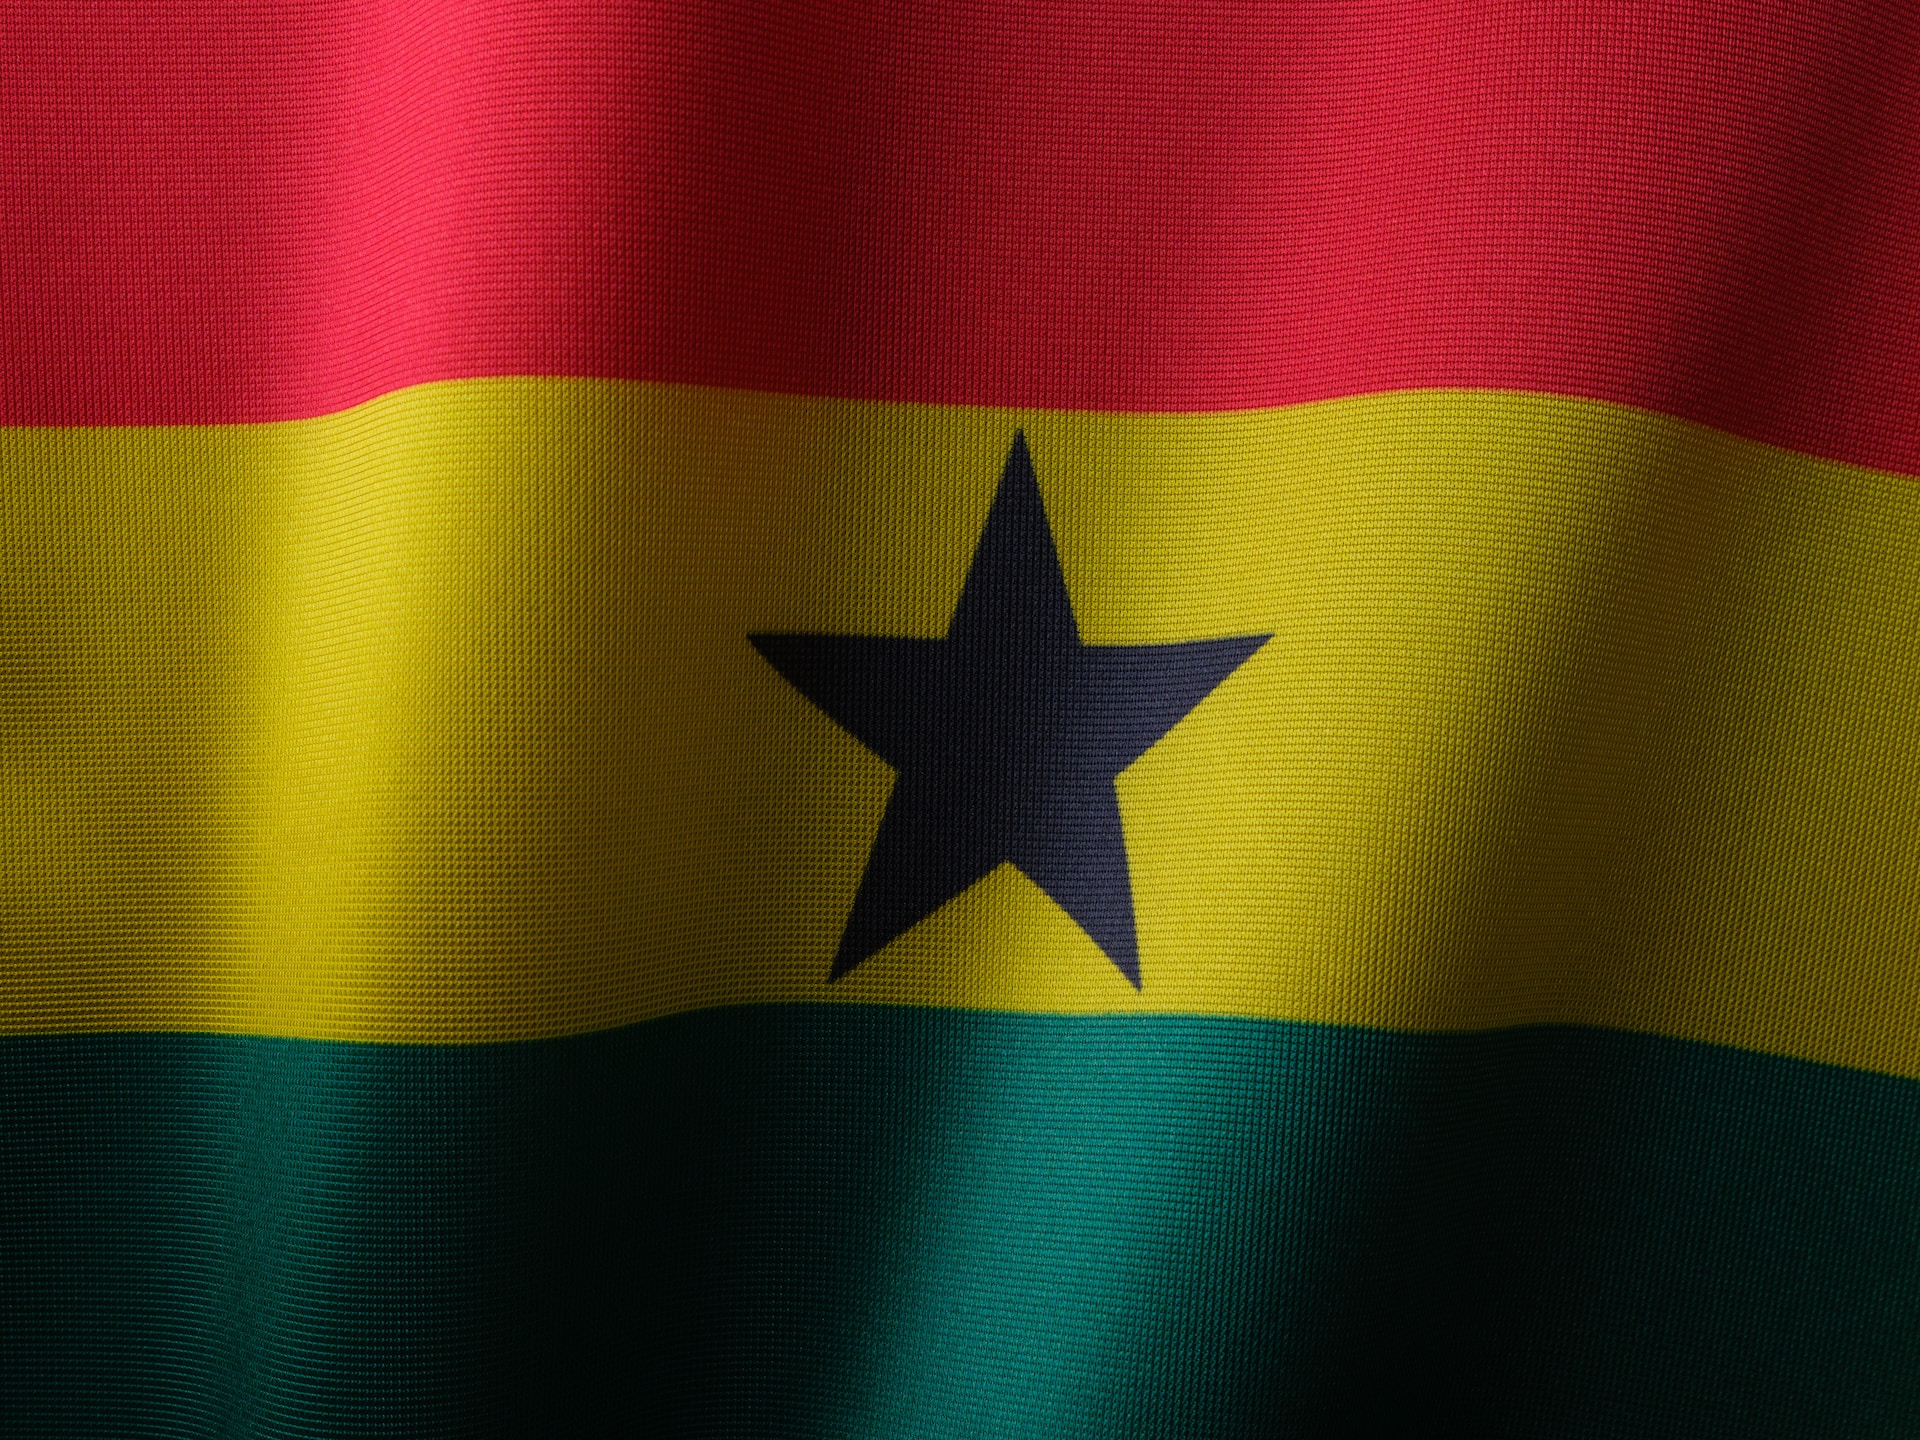 Title: The Economic Impact of Covid-19 on Ghana: Challenges and Opportunities